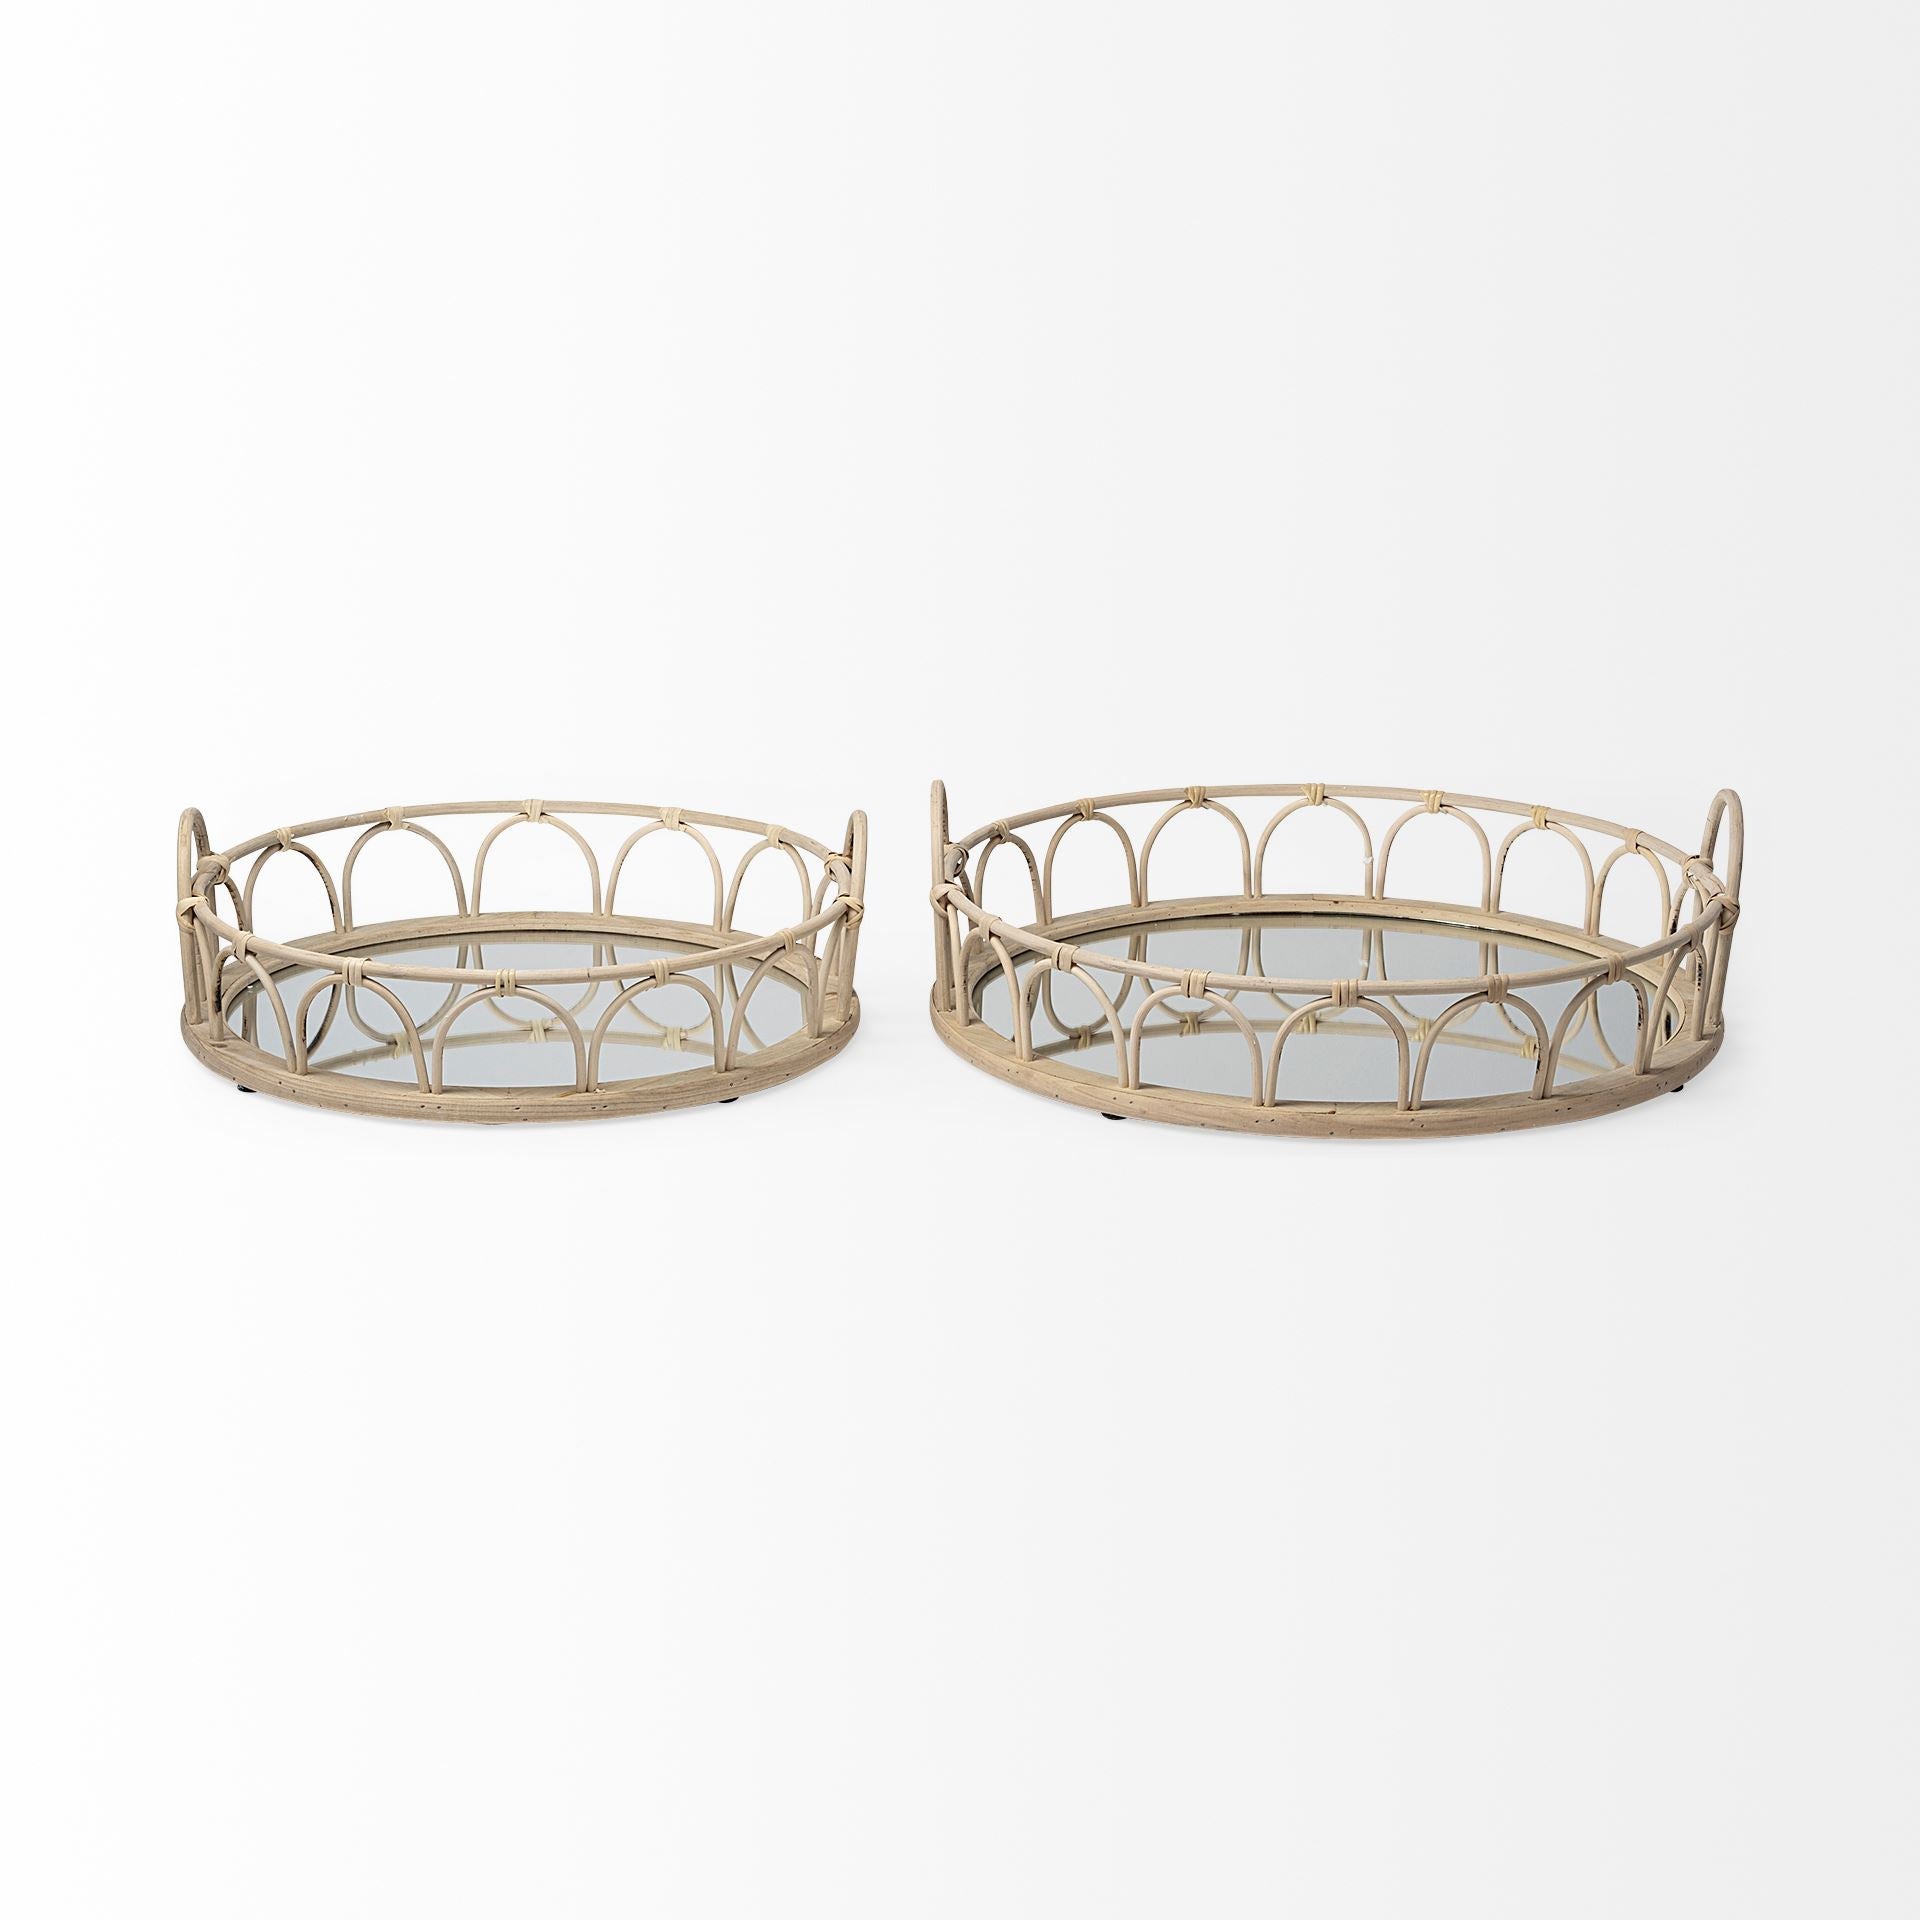 Set Of 2 20" Natural Blonde Wood With Intricately Railings And Mirrored Glass Bottom Round Tray